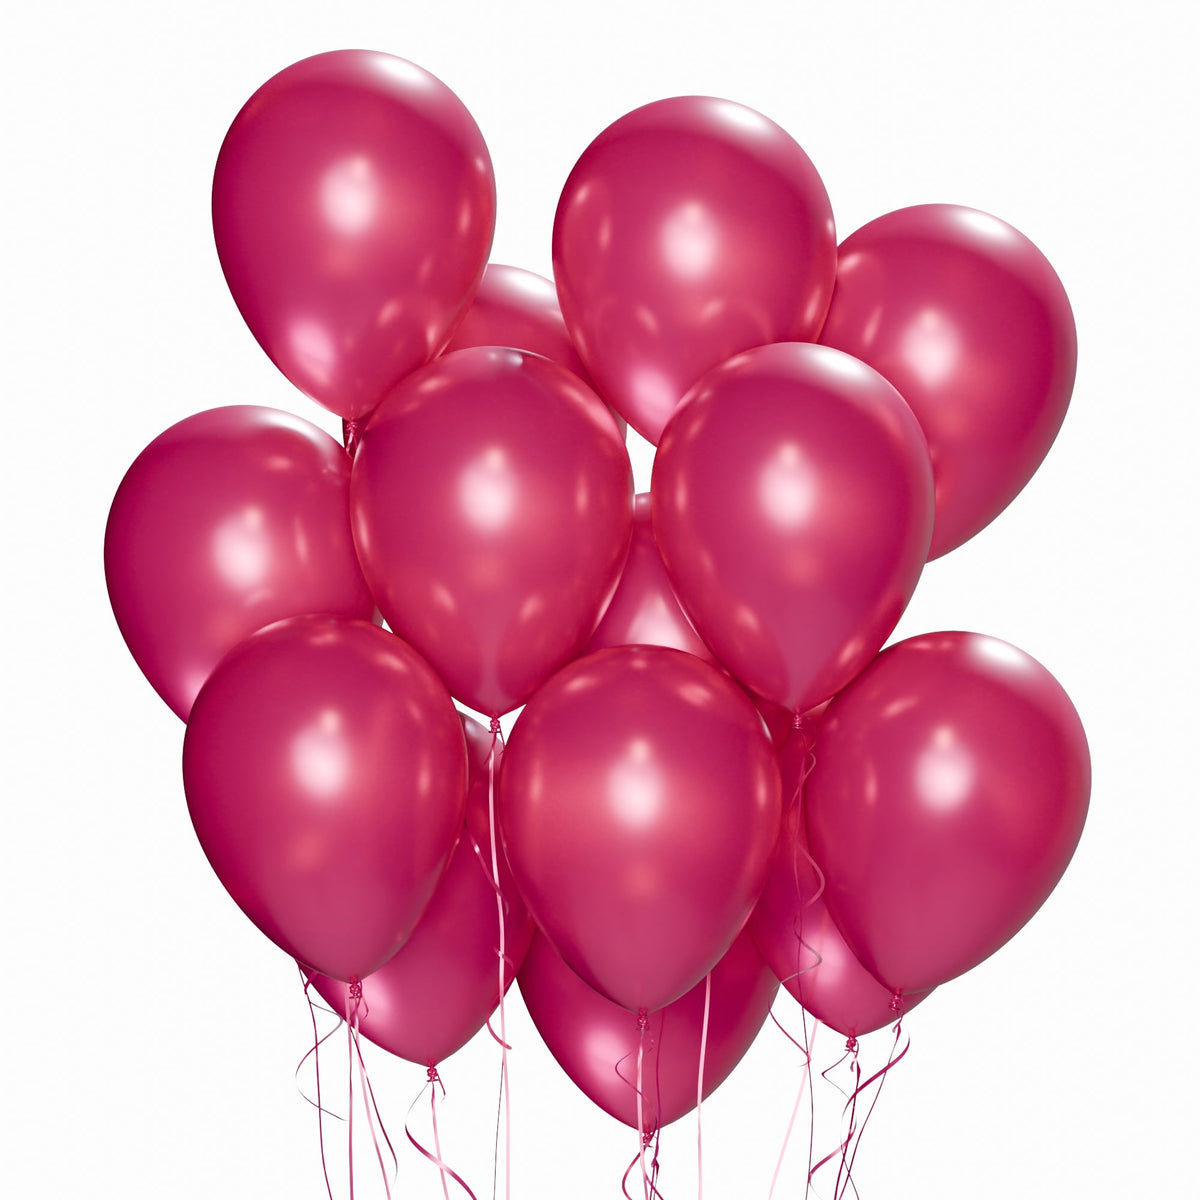 WIDE OCEAN INTERNATIONAL TRADE BEIJING CO., LTD Balloons Fuchsia Latex Balloon 12 Inches, Pearl Collection, 15 Count 810064197710